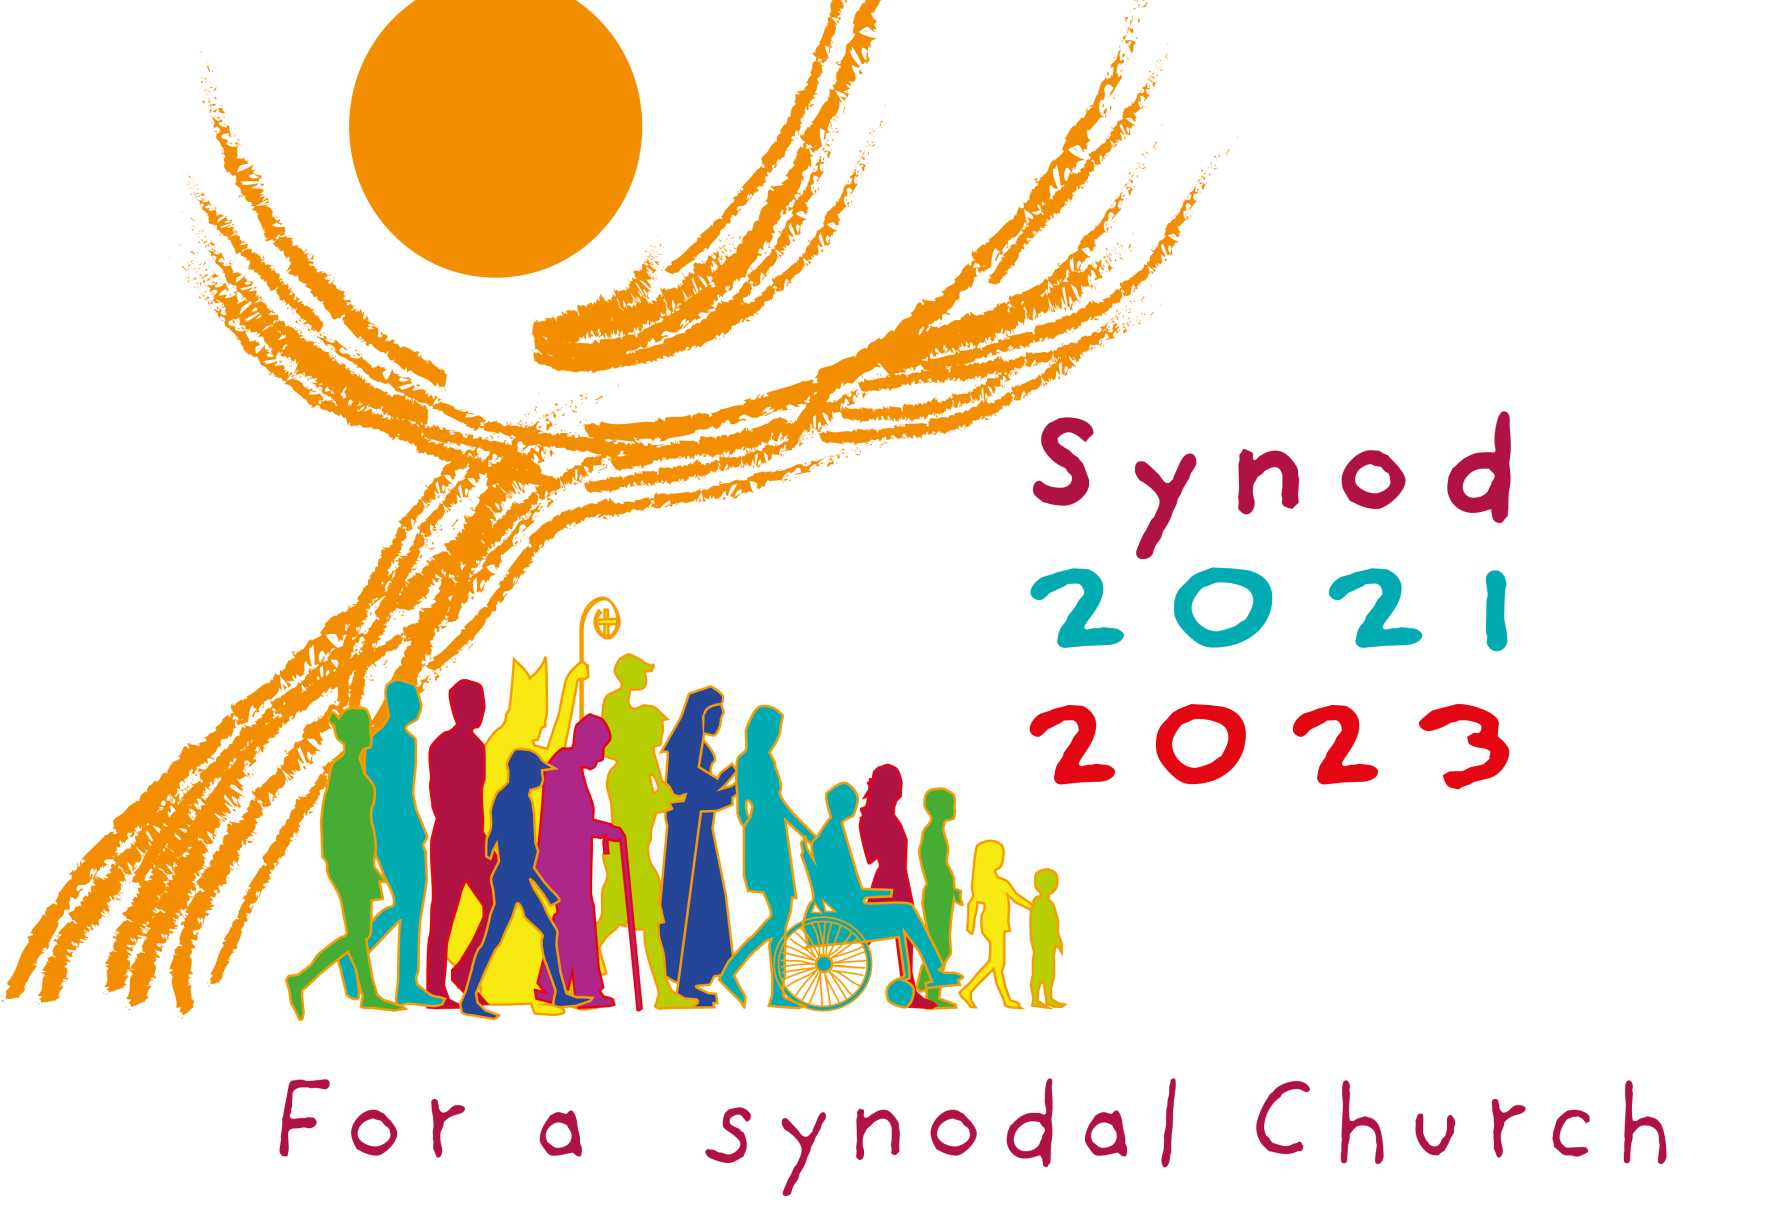 President of USCCB Welcomes the “Synod on Synodality” Convoked by Pope Francis as Diocesan Consultation and Dialogue Phase Begins